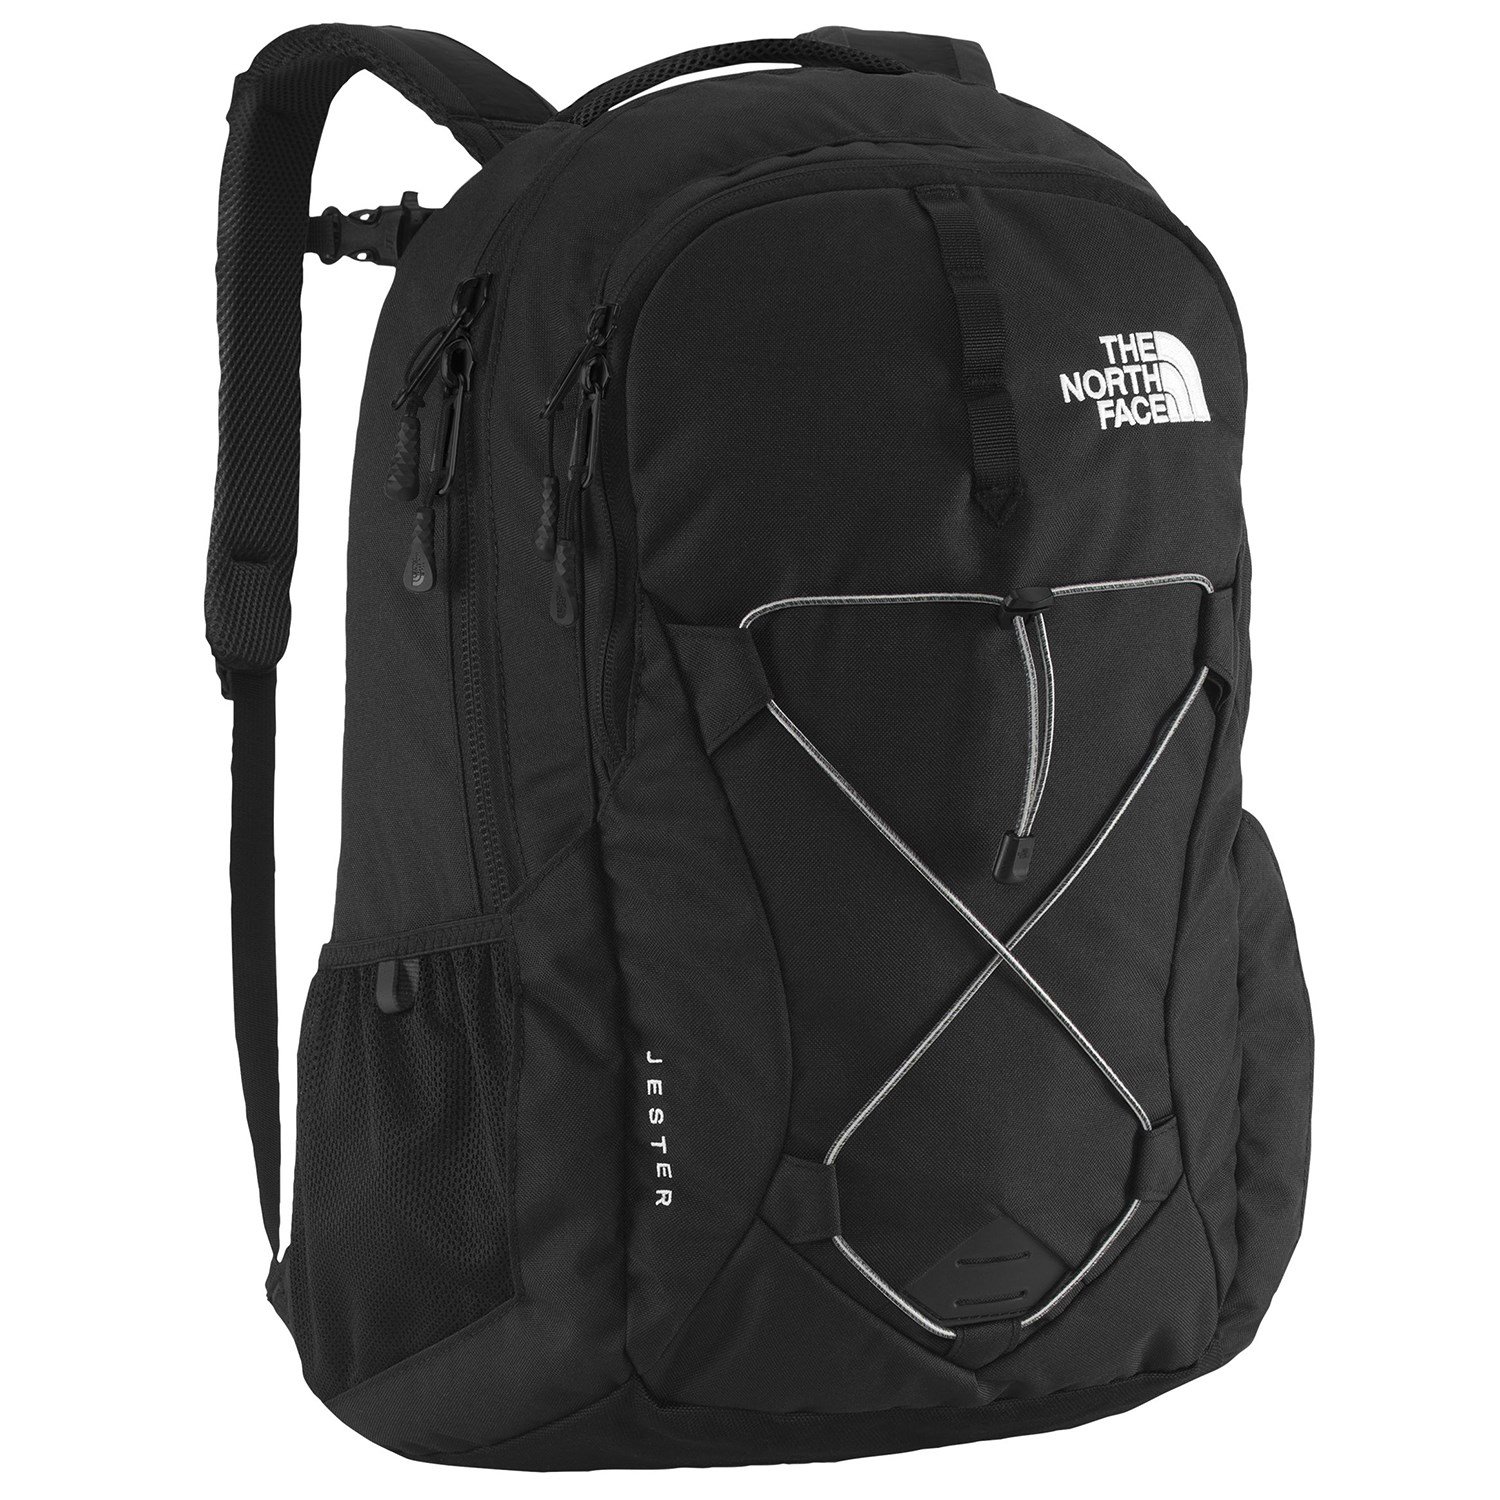 gray and pink north face backpack